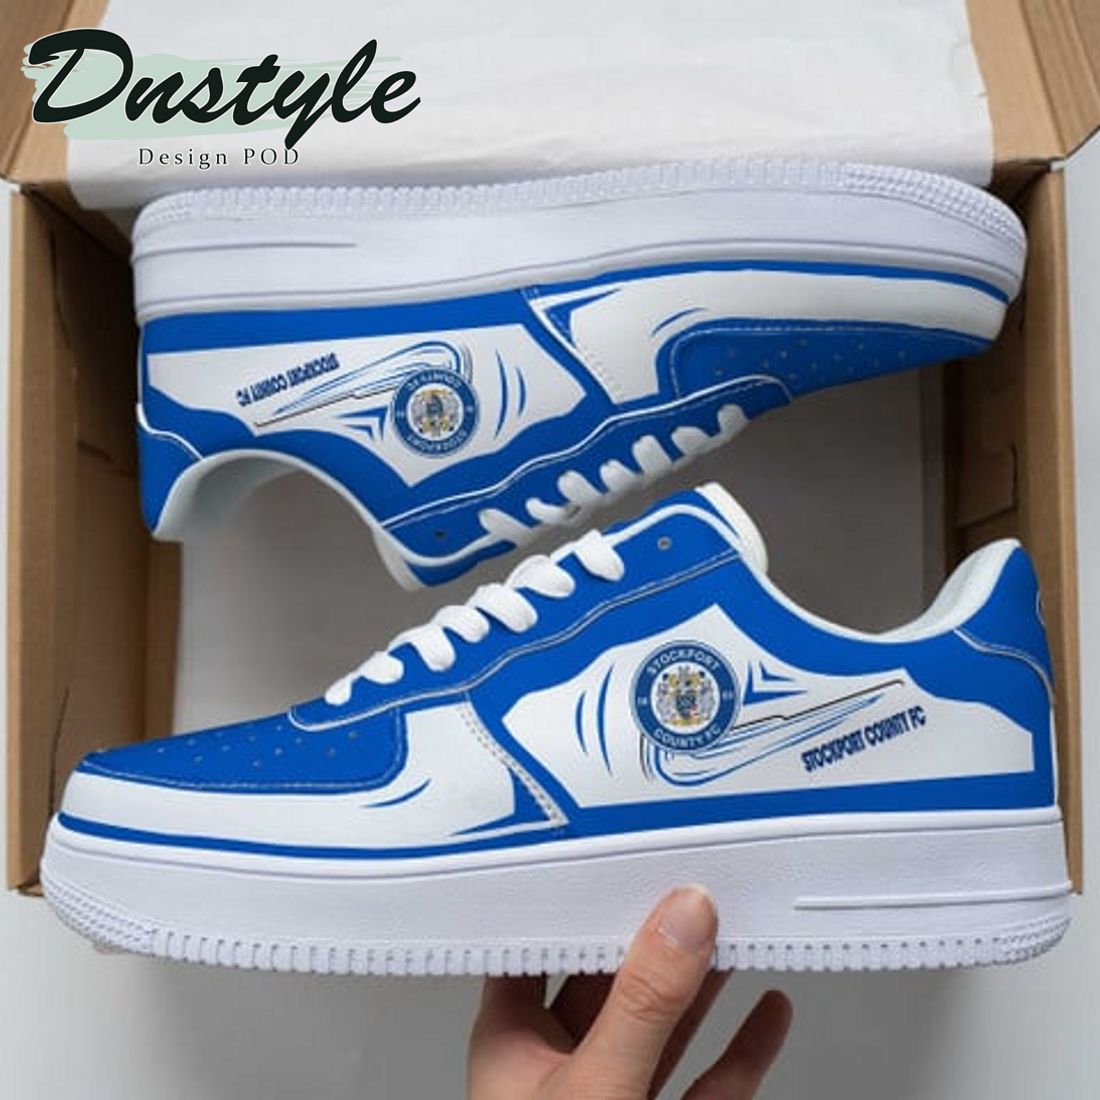 Stockport County FC EFL Championship Nike Air Force 1 Sneakers